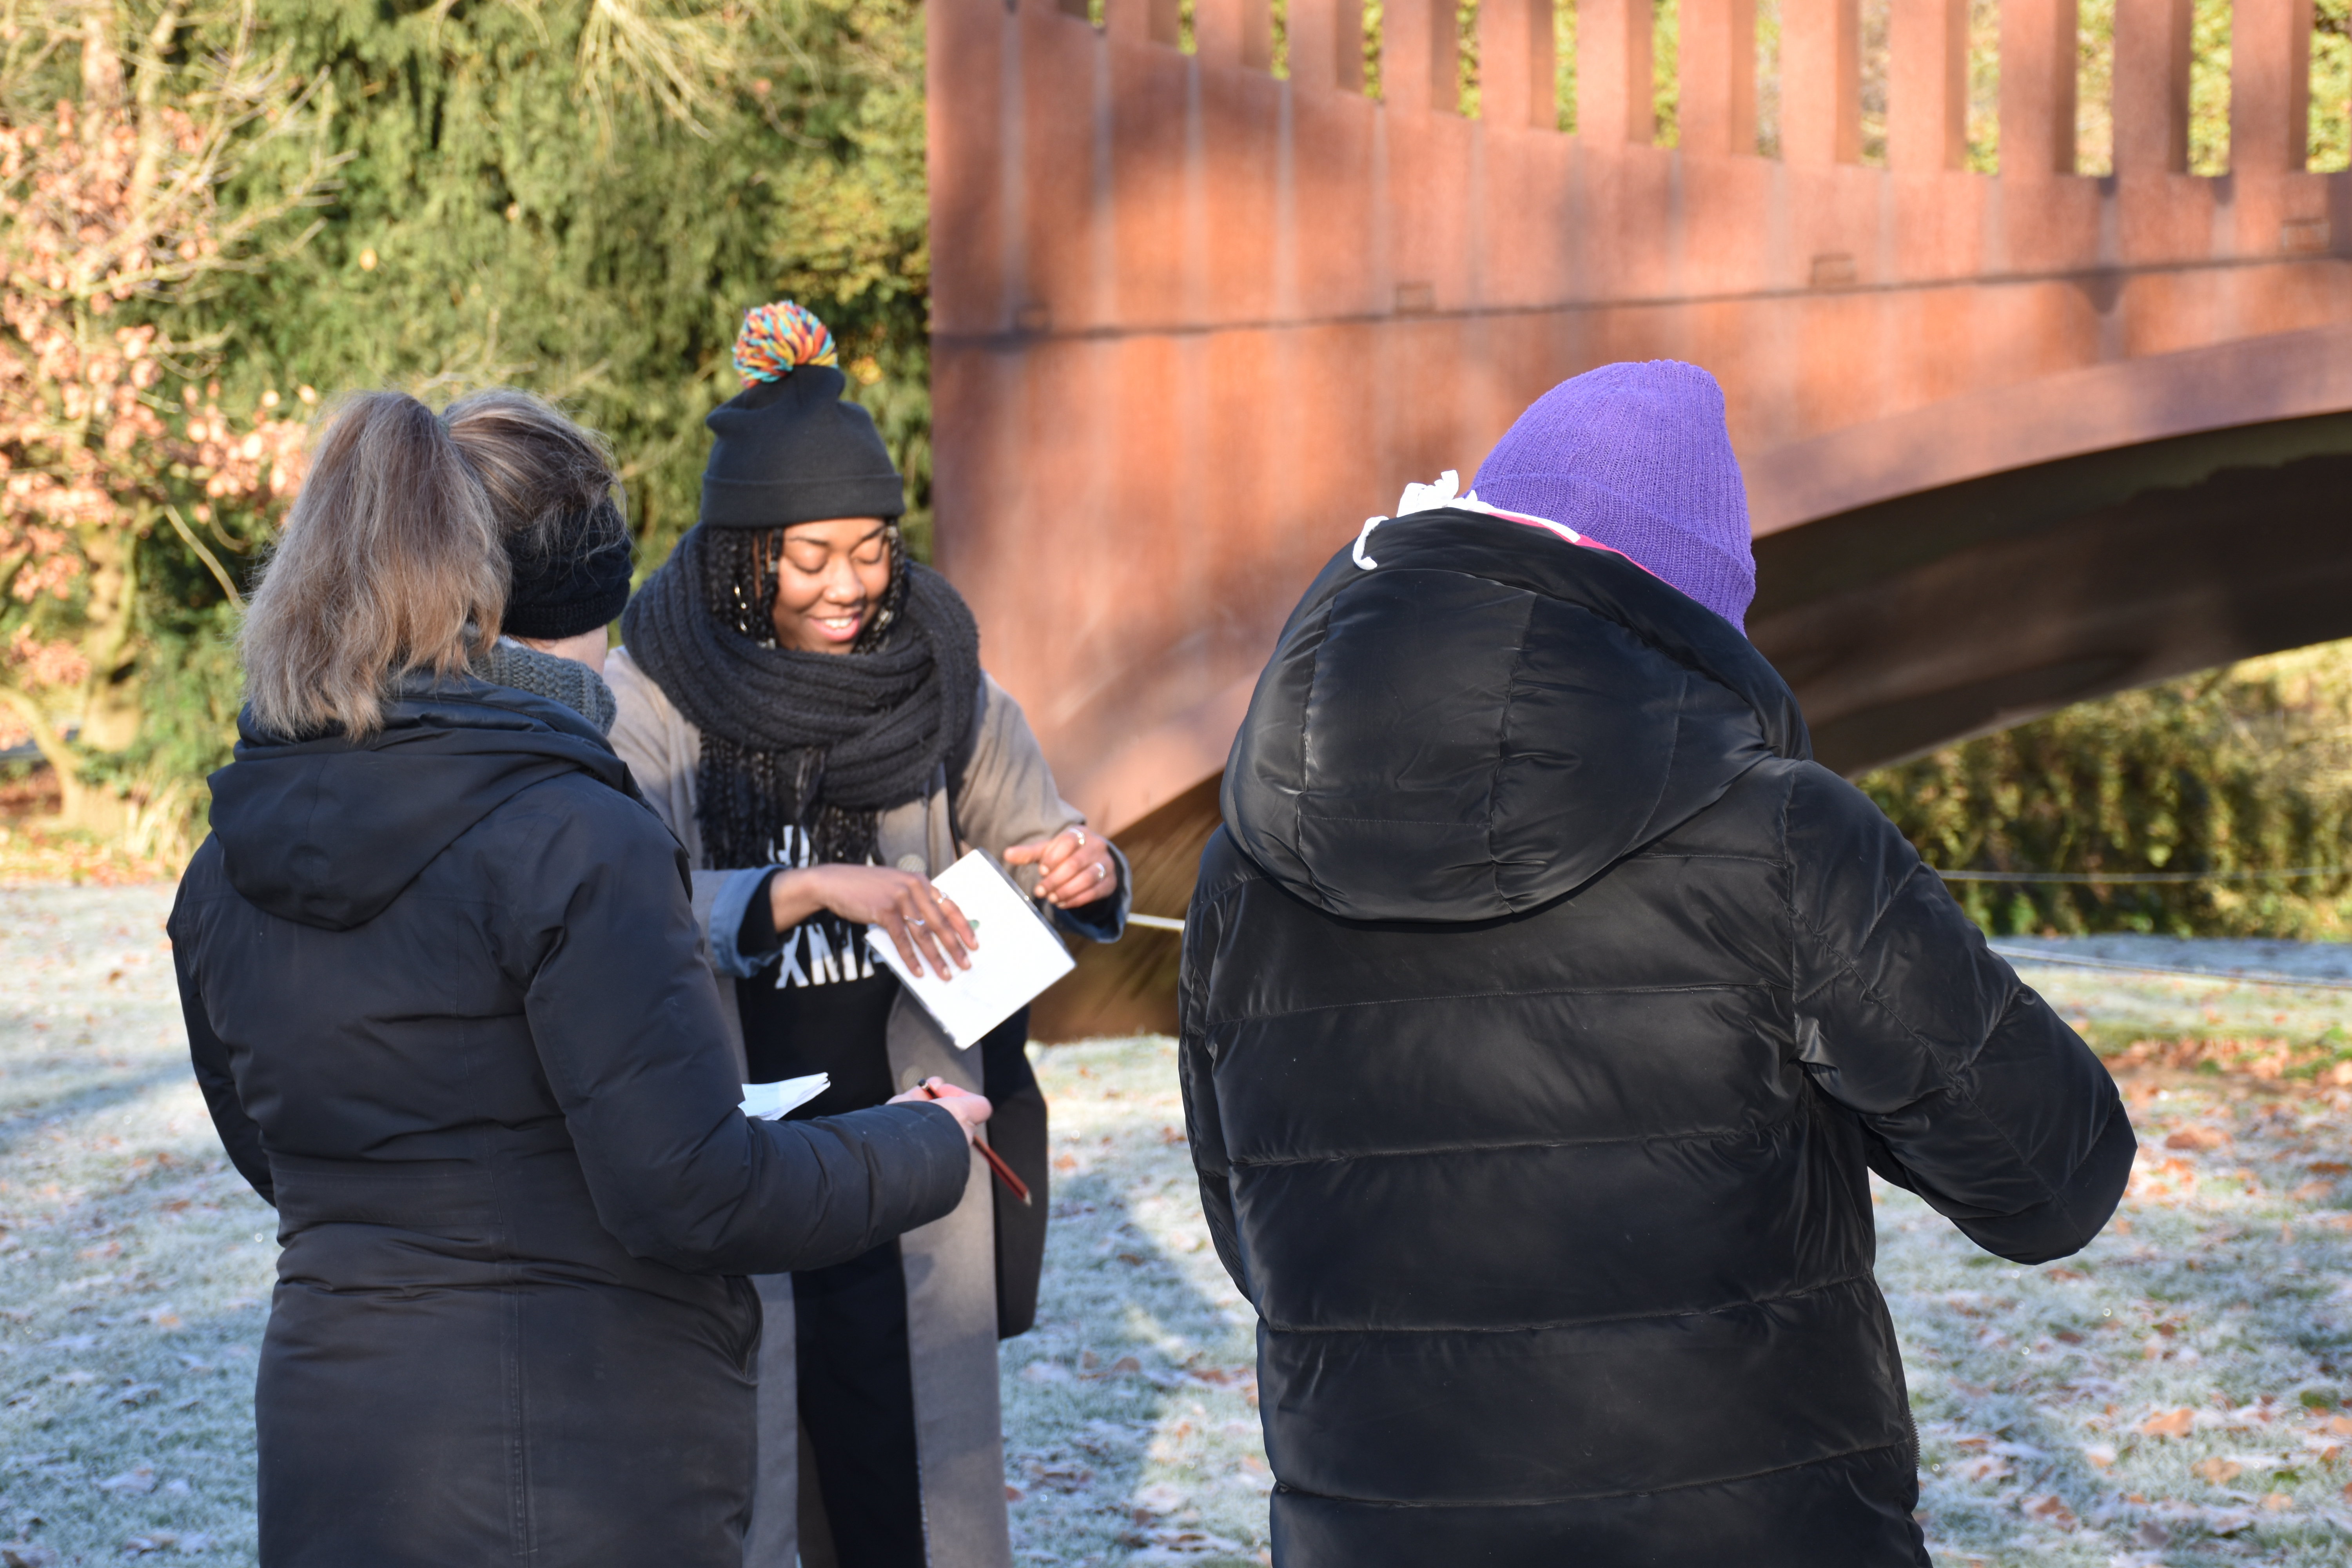 A group of people wearing winter hats and scarves looking at a bronze bridge-like sculpture outdoors.